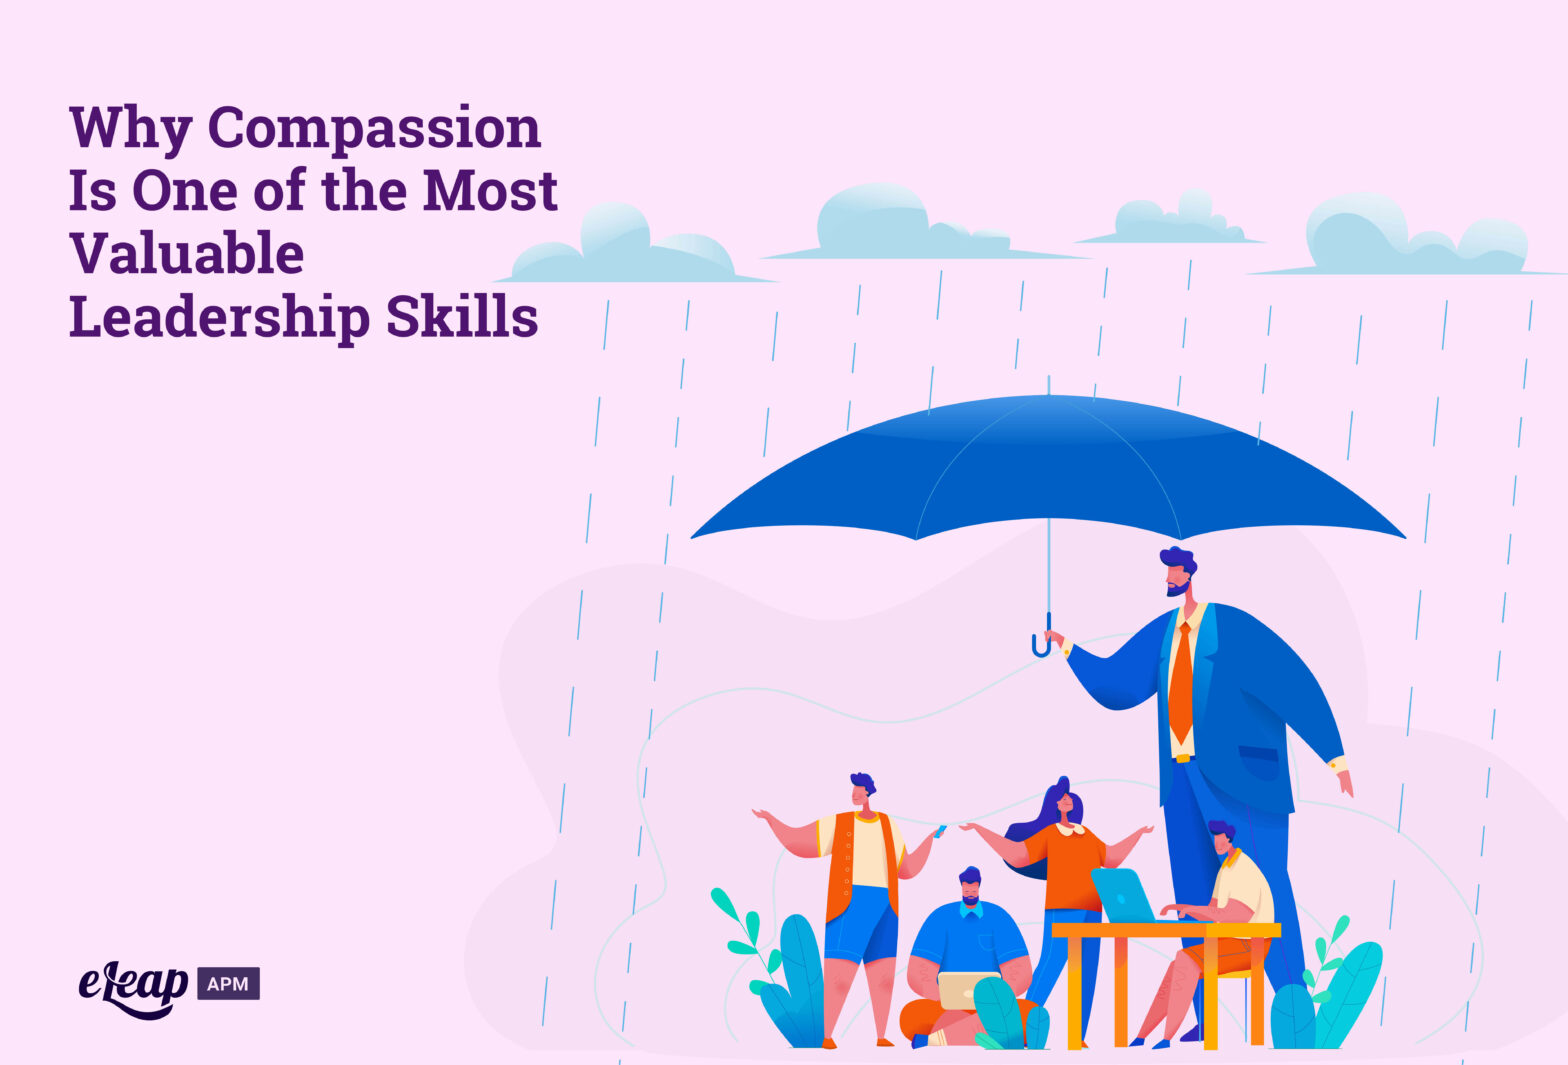 Why Compassion Is One of the Most Valuable Leadership Skills